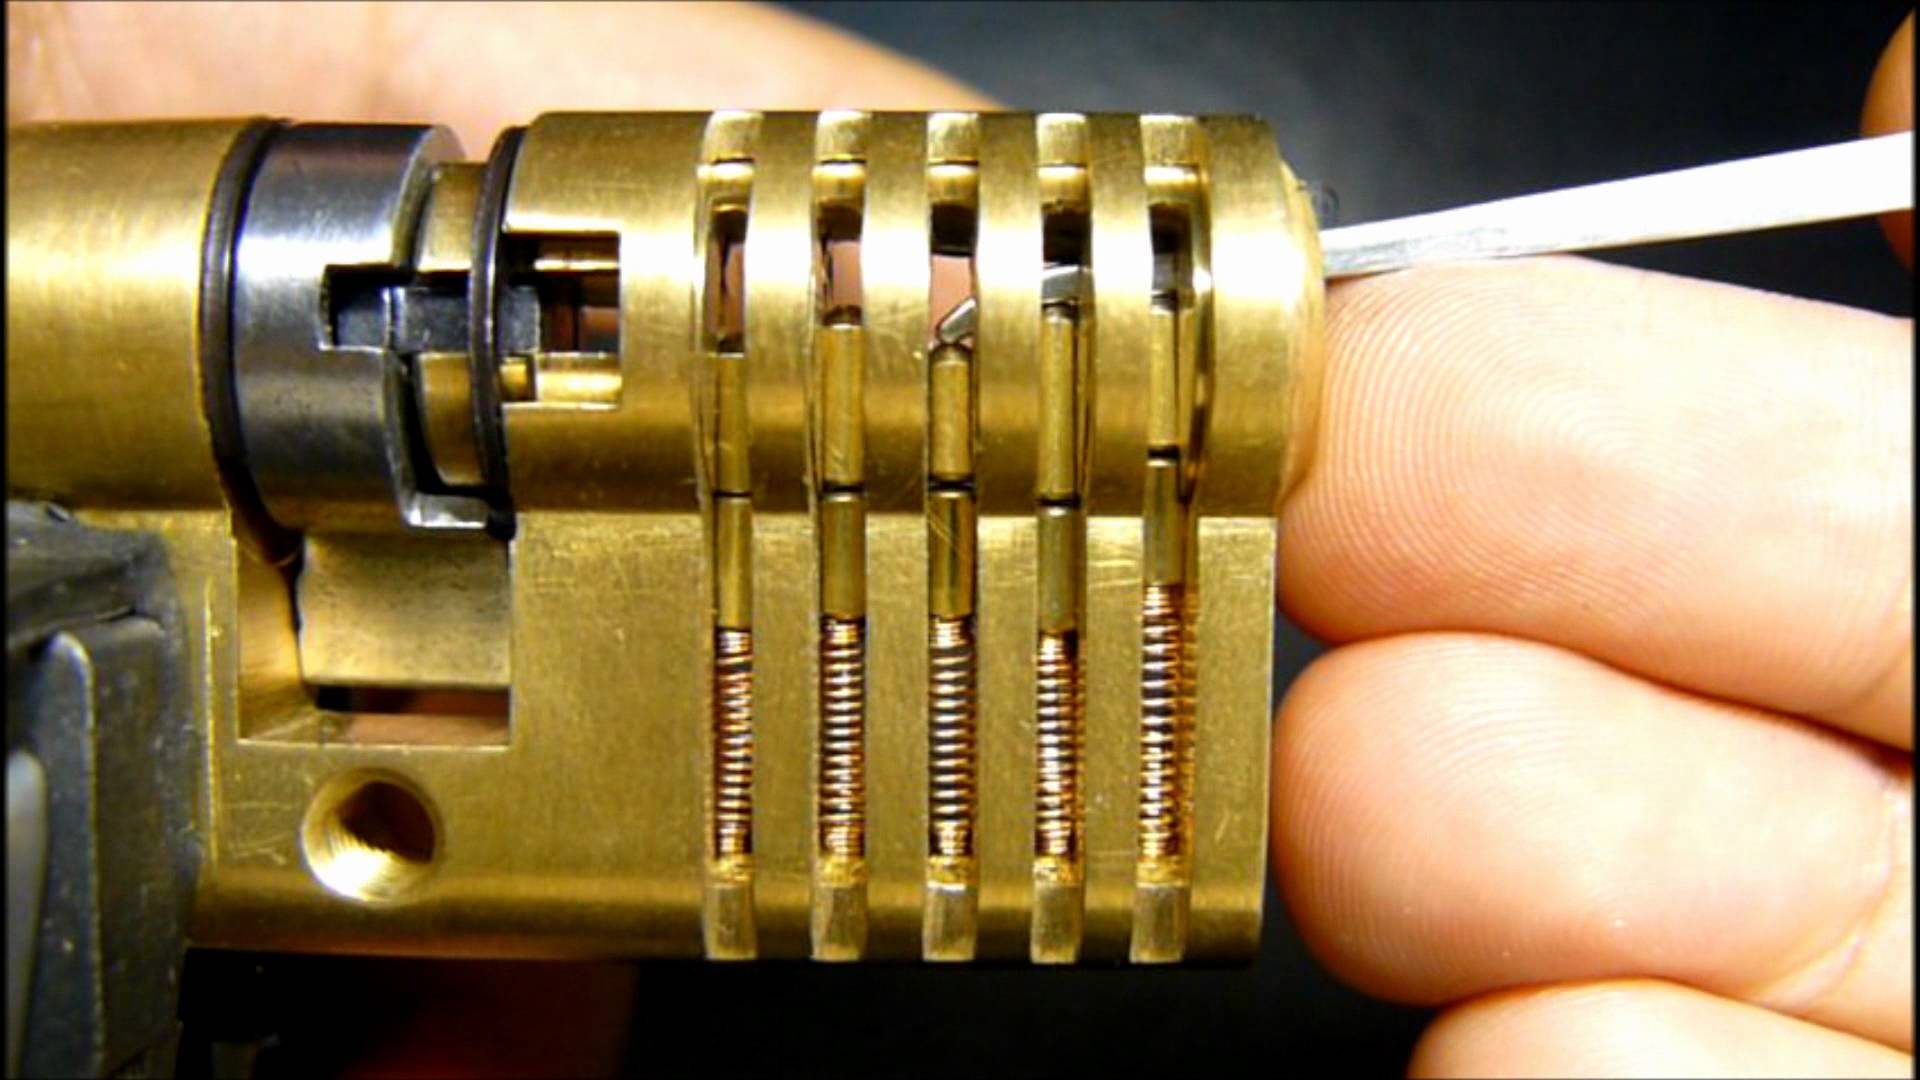 Trending Now: Lock Picking as a Hobby